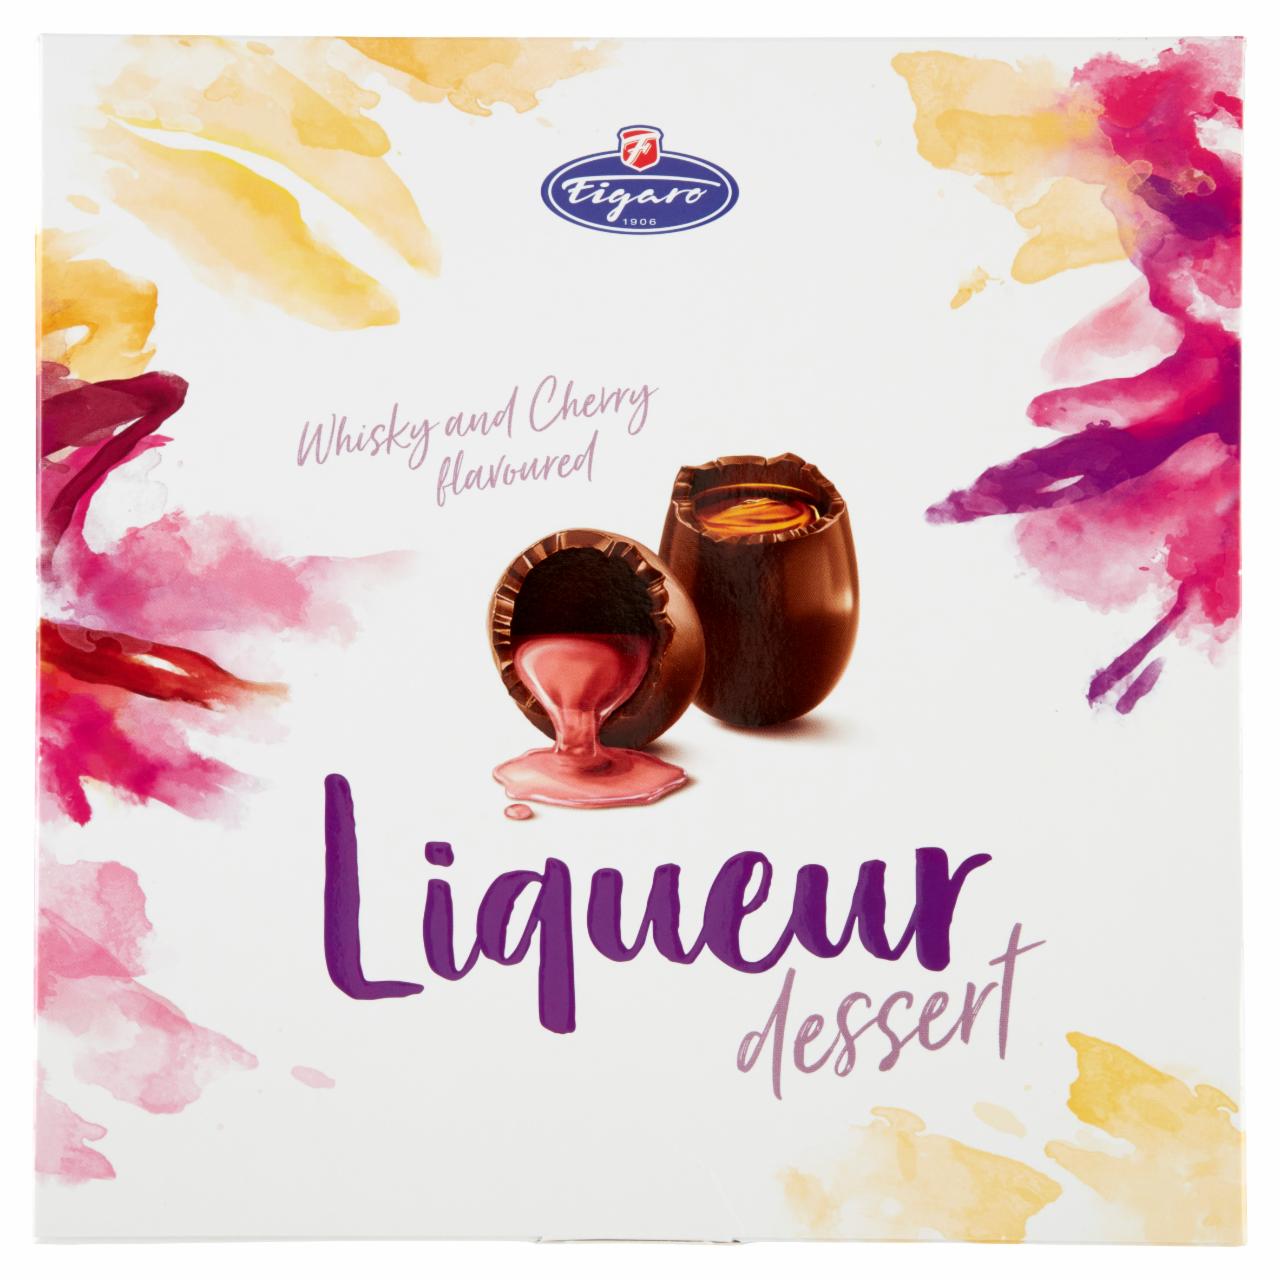 Photo - Figaro Whisky and Cherry Flavoured Liqueur Dessert 220 g